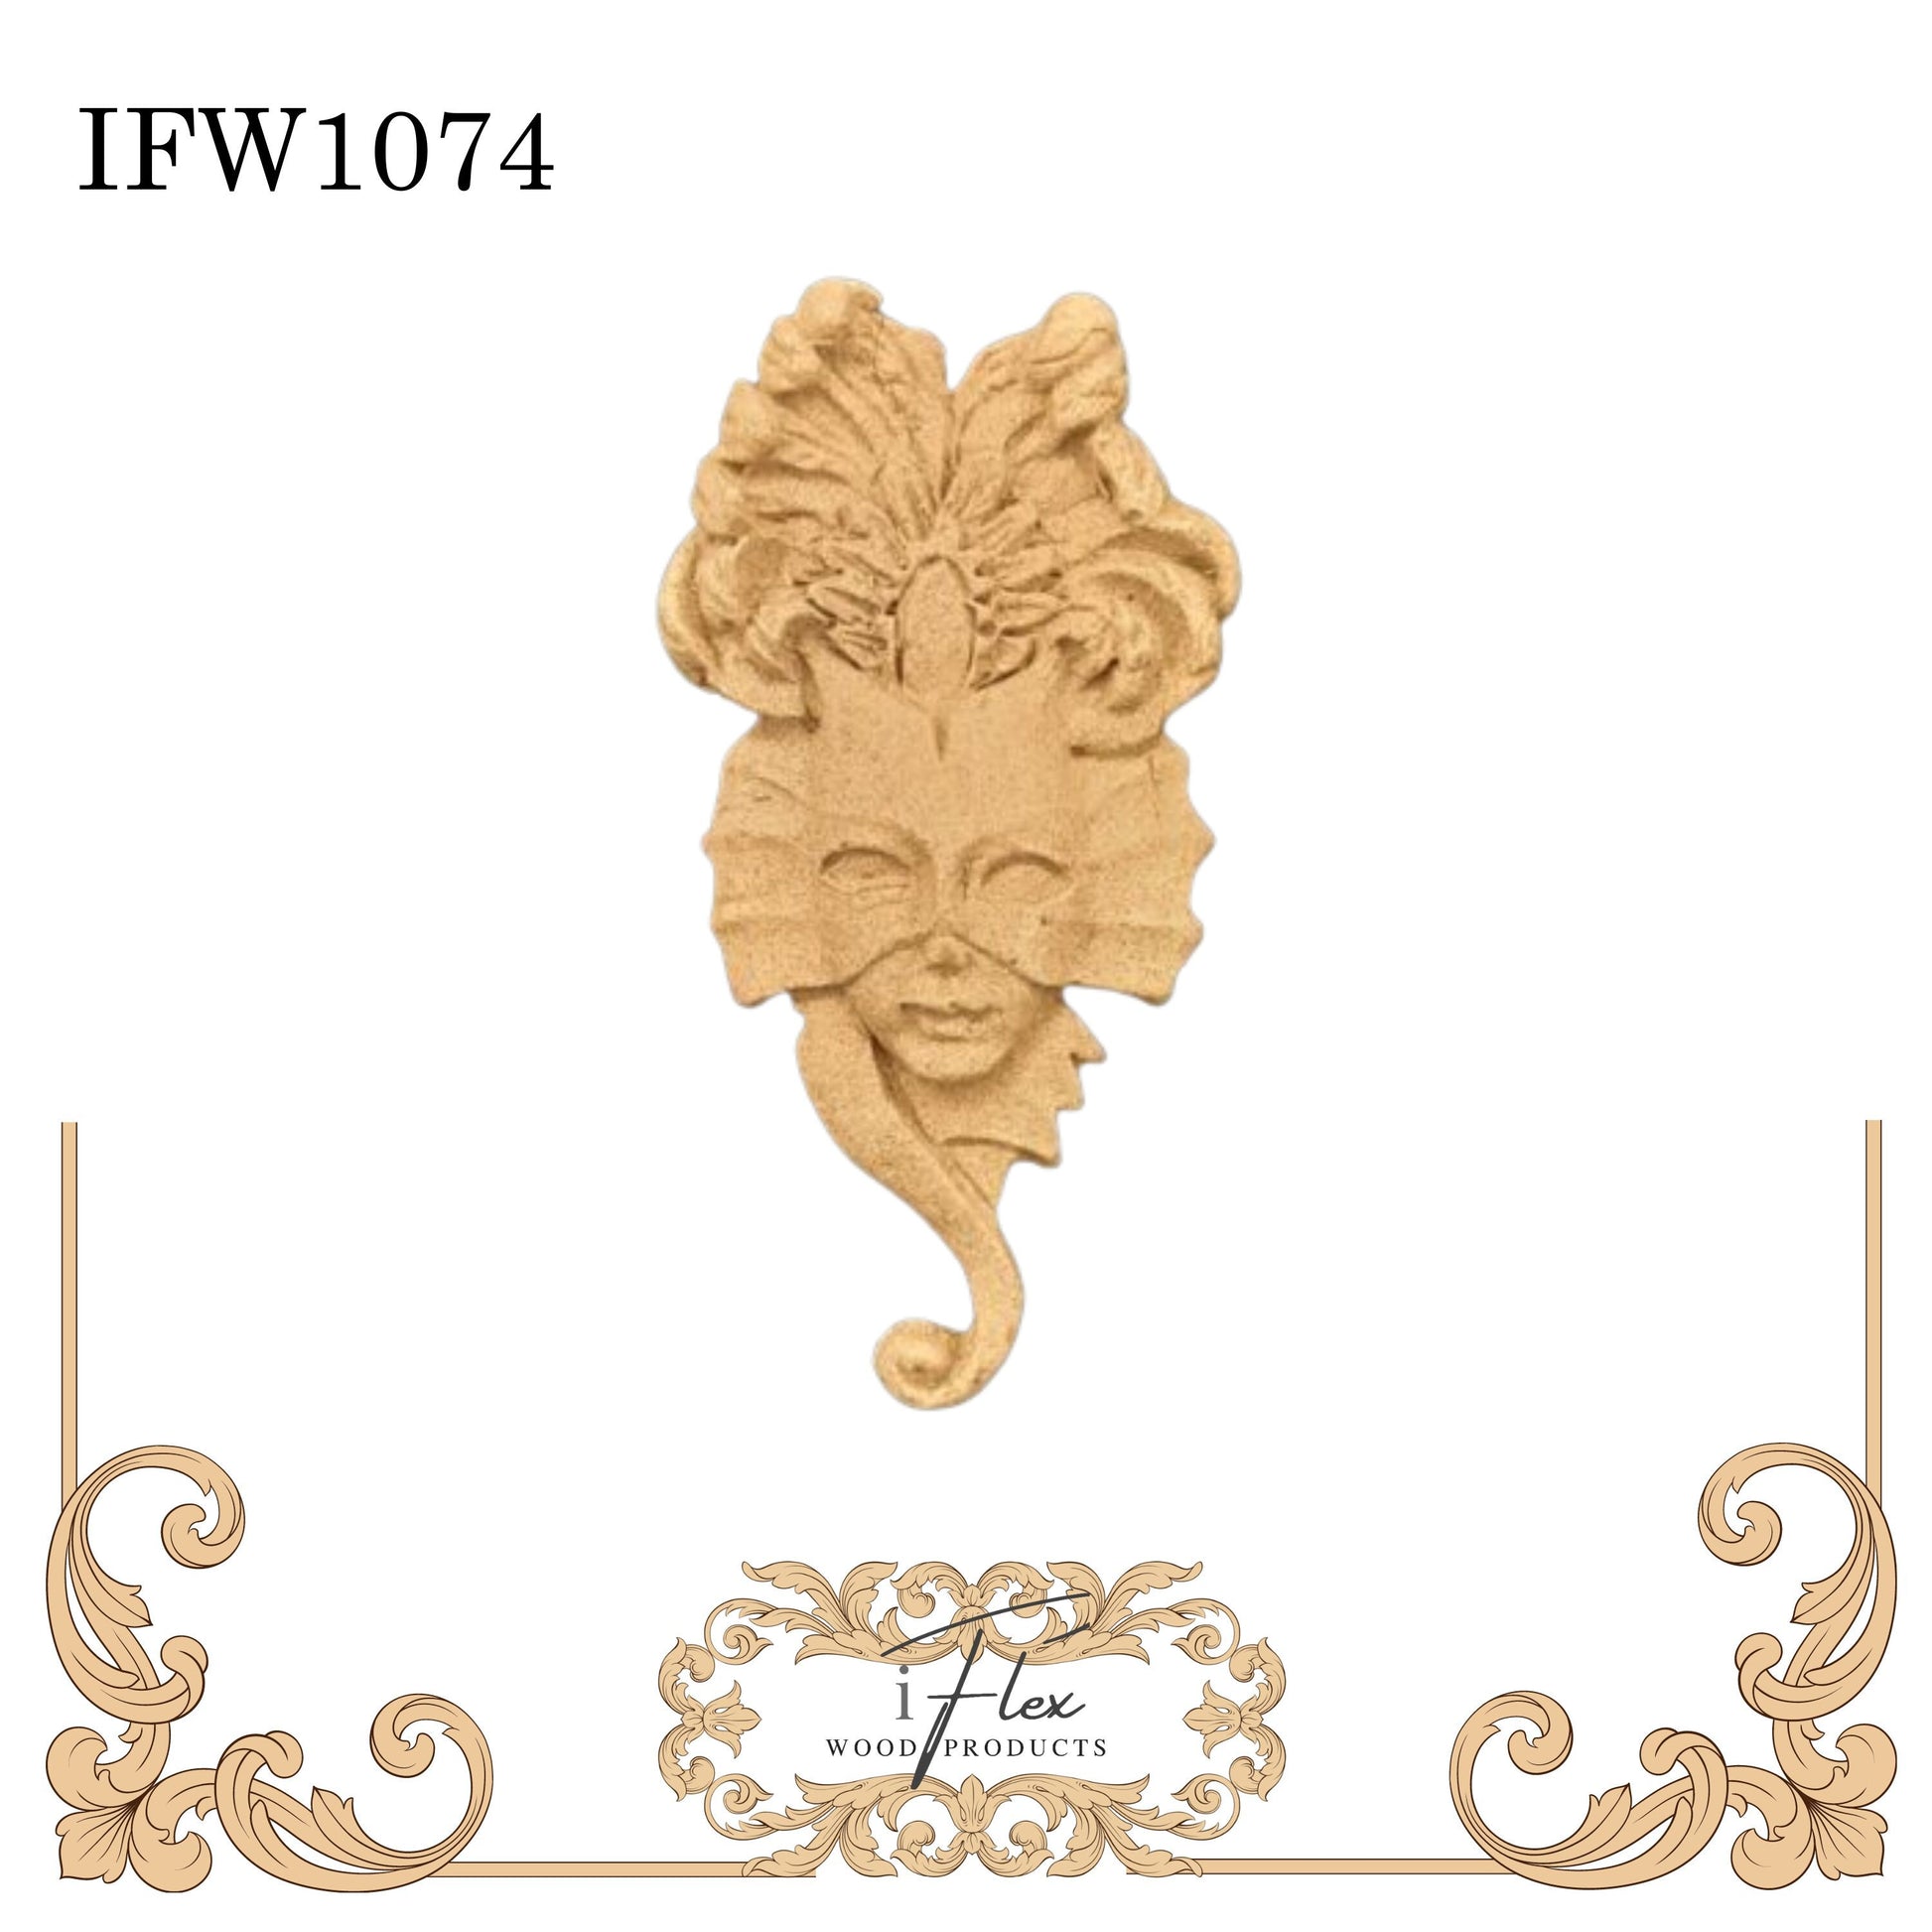 IFW 1074 iFlex Wood Products, bendable mouldings, flexible, wooden appliques, Mardi Gras Mask, lady mask